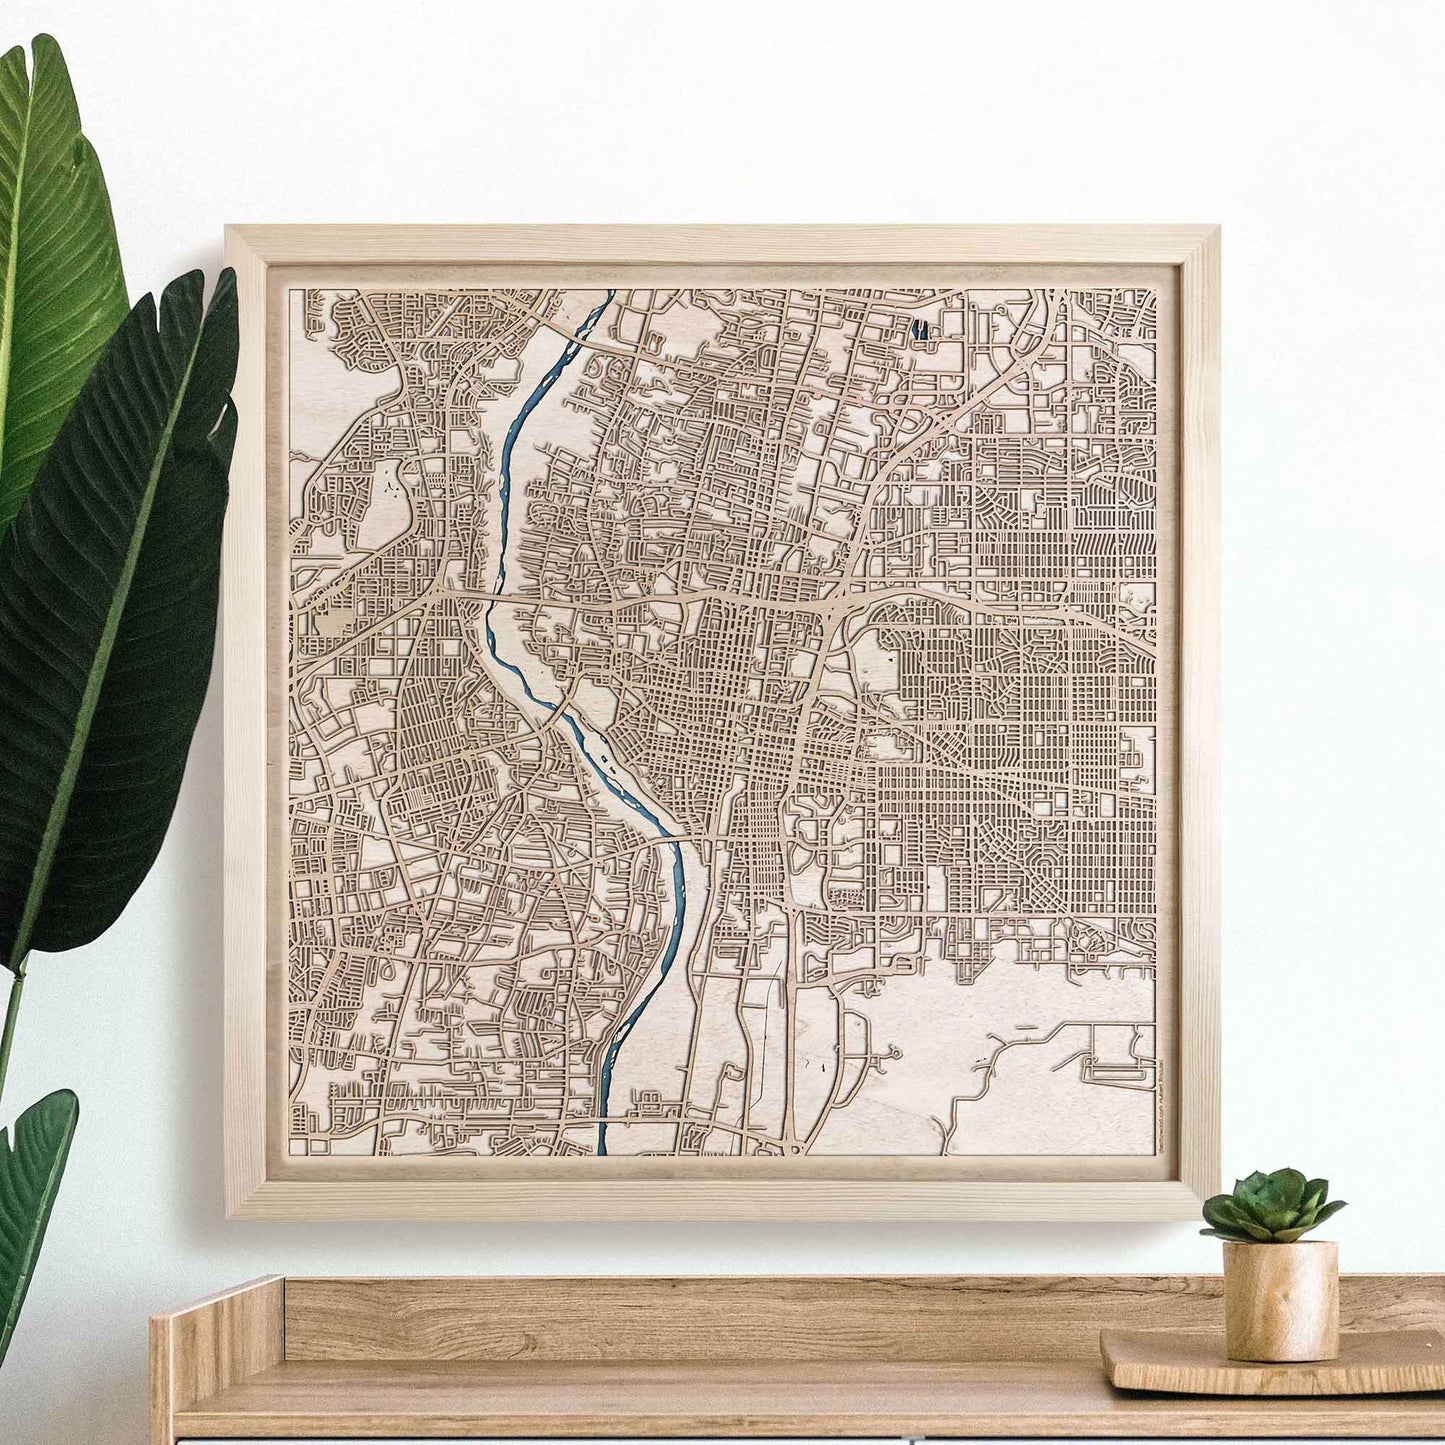 Albuquerque Wooden Map by CityWood - Custom Wood Map Art - Unique Laser Cut Engraved - Anniversary Gift